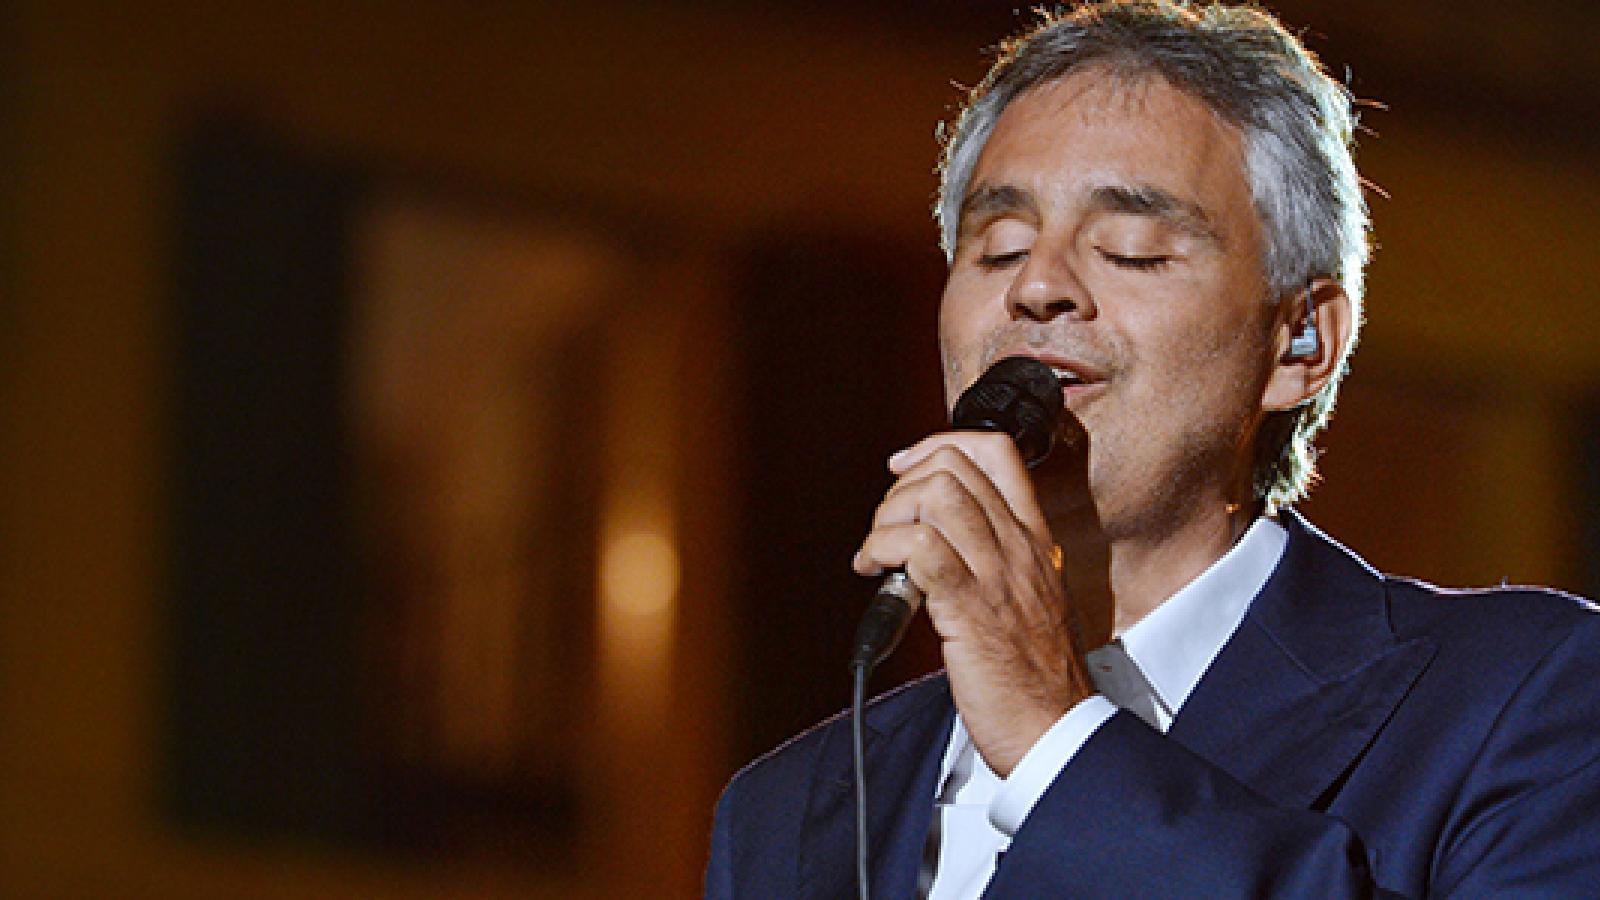 andrea bocelli at valley view casino